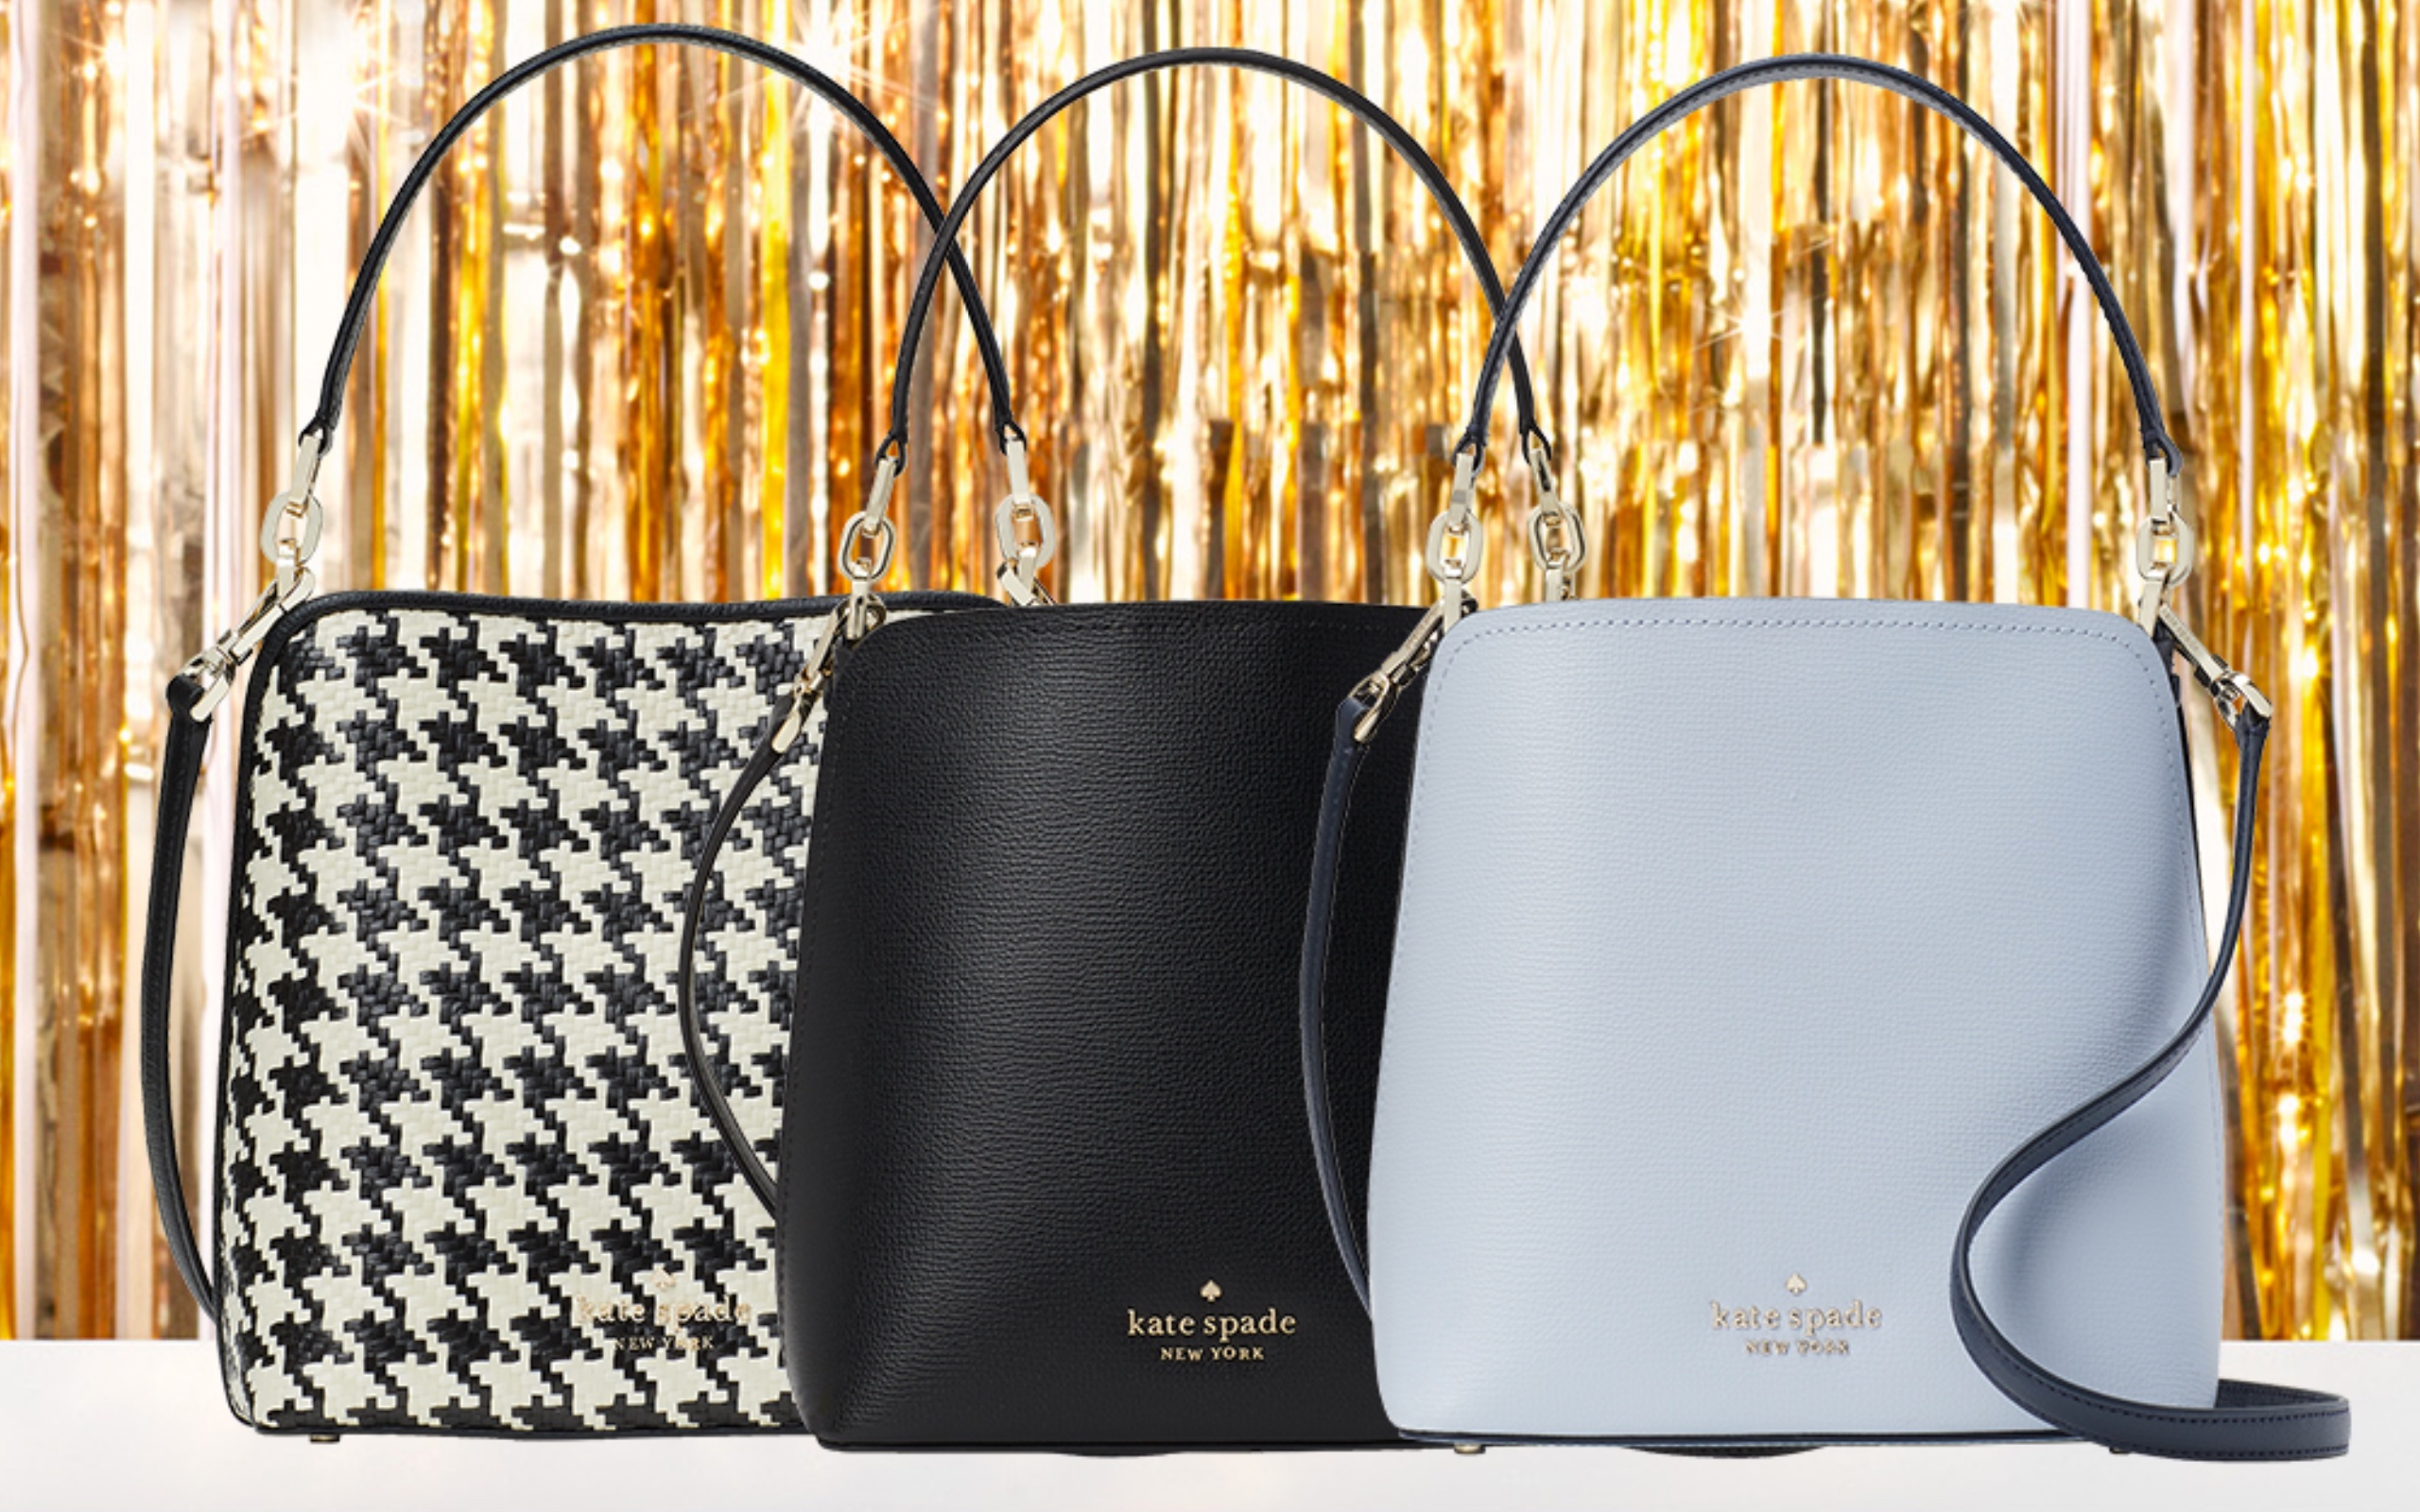 Kate Spade Black Friday takes 50% off sitewide: Handbags, wallets,  accessories, more